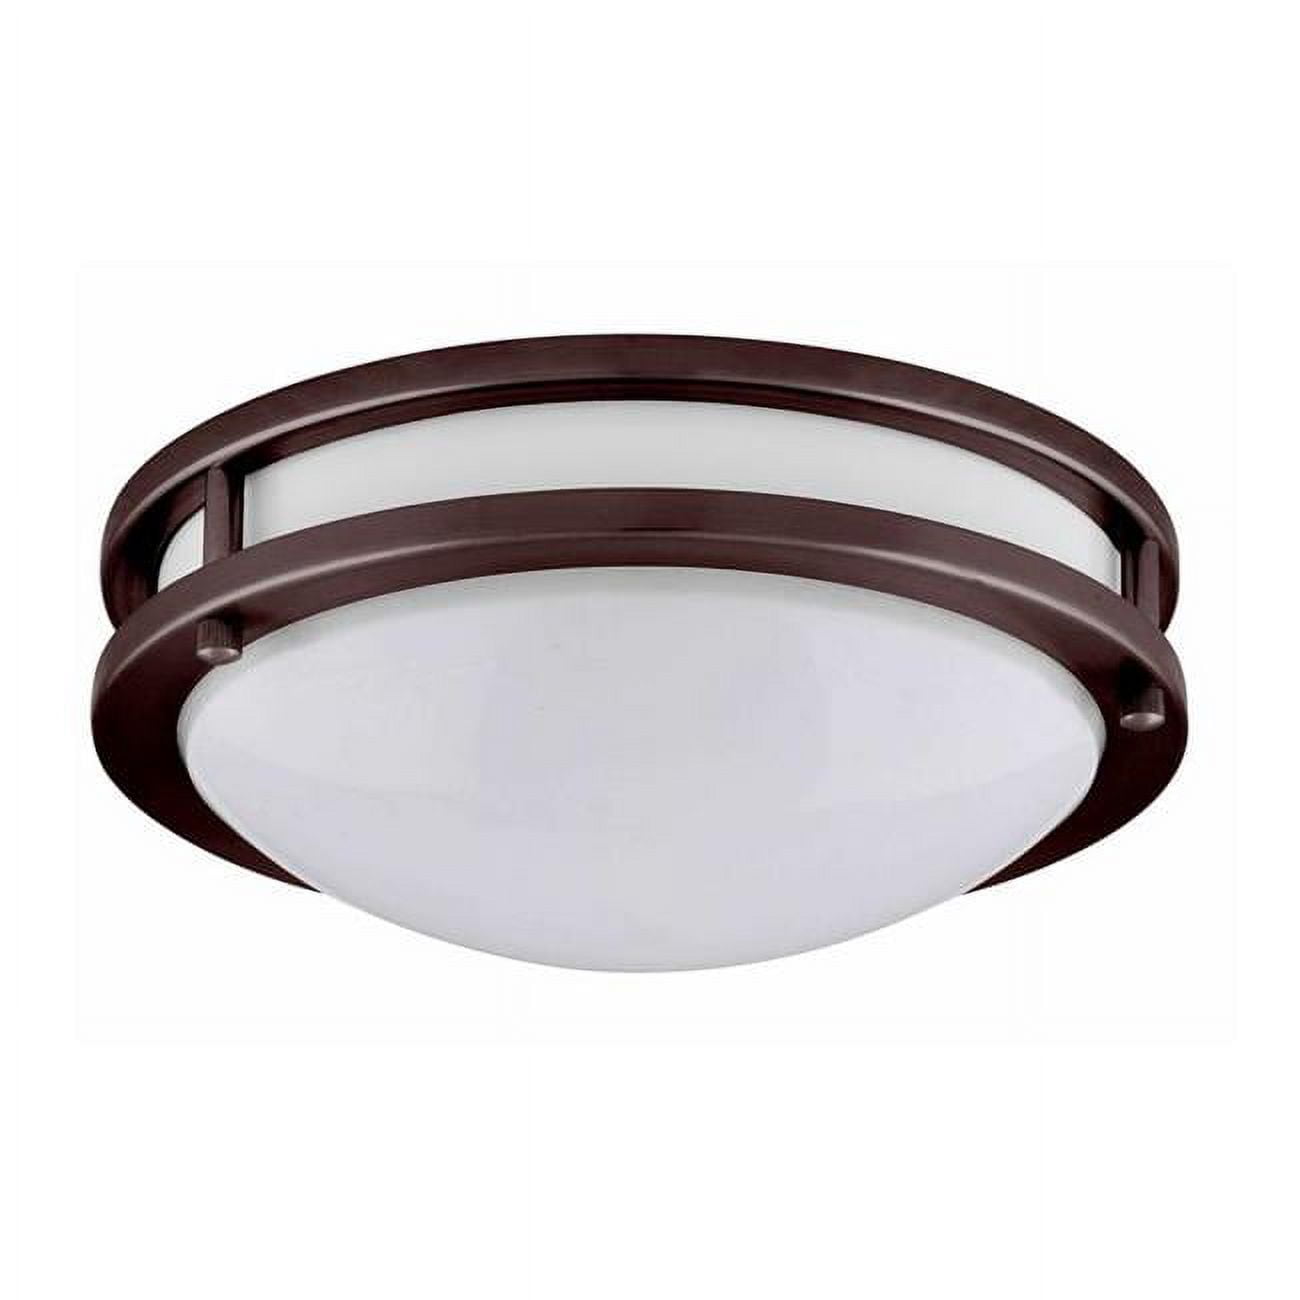 Picture of AMAX Lighting LED-JR002LBZ-W 14 x 3.8 in. LED Ceiling Fixture - JR Bronze